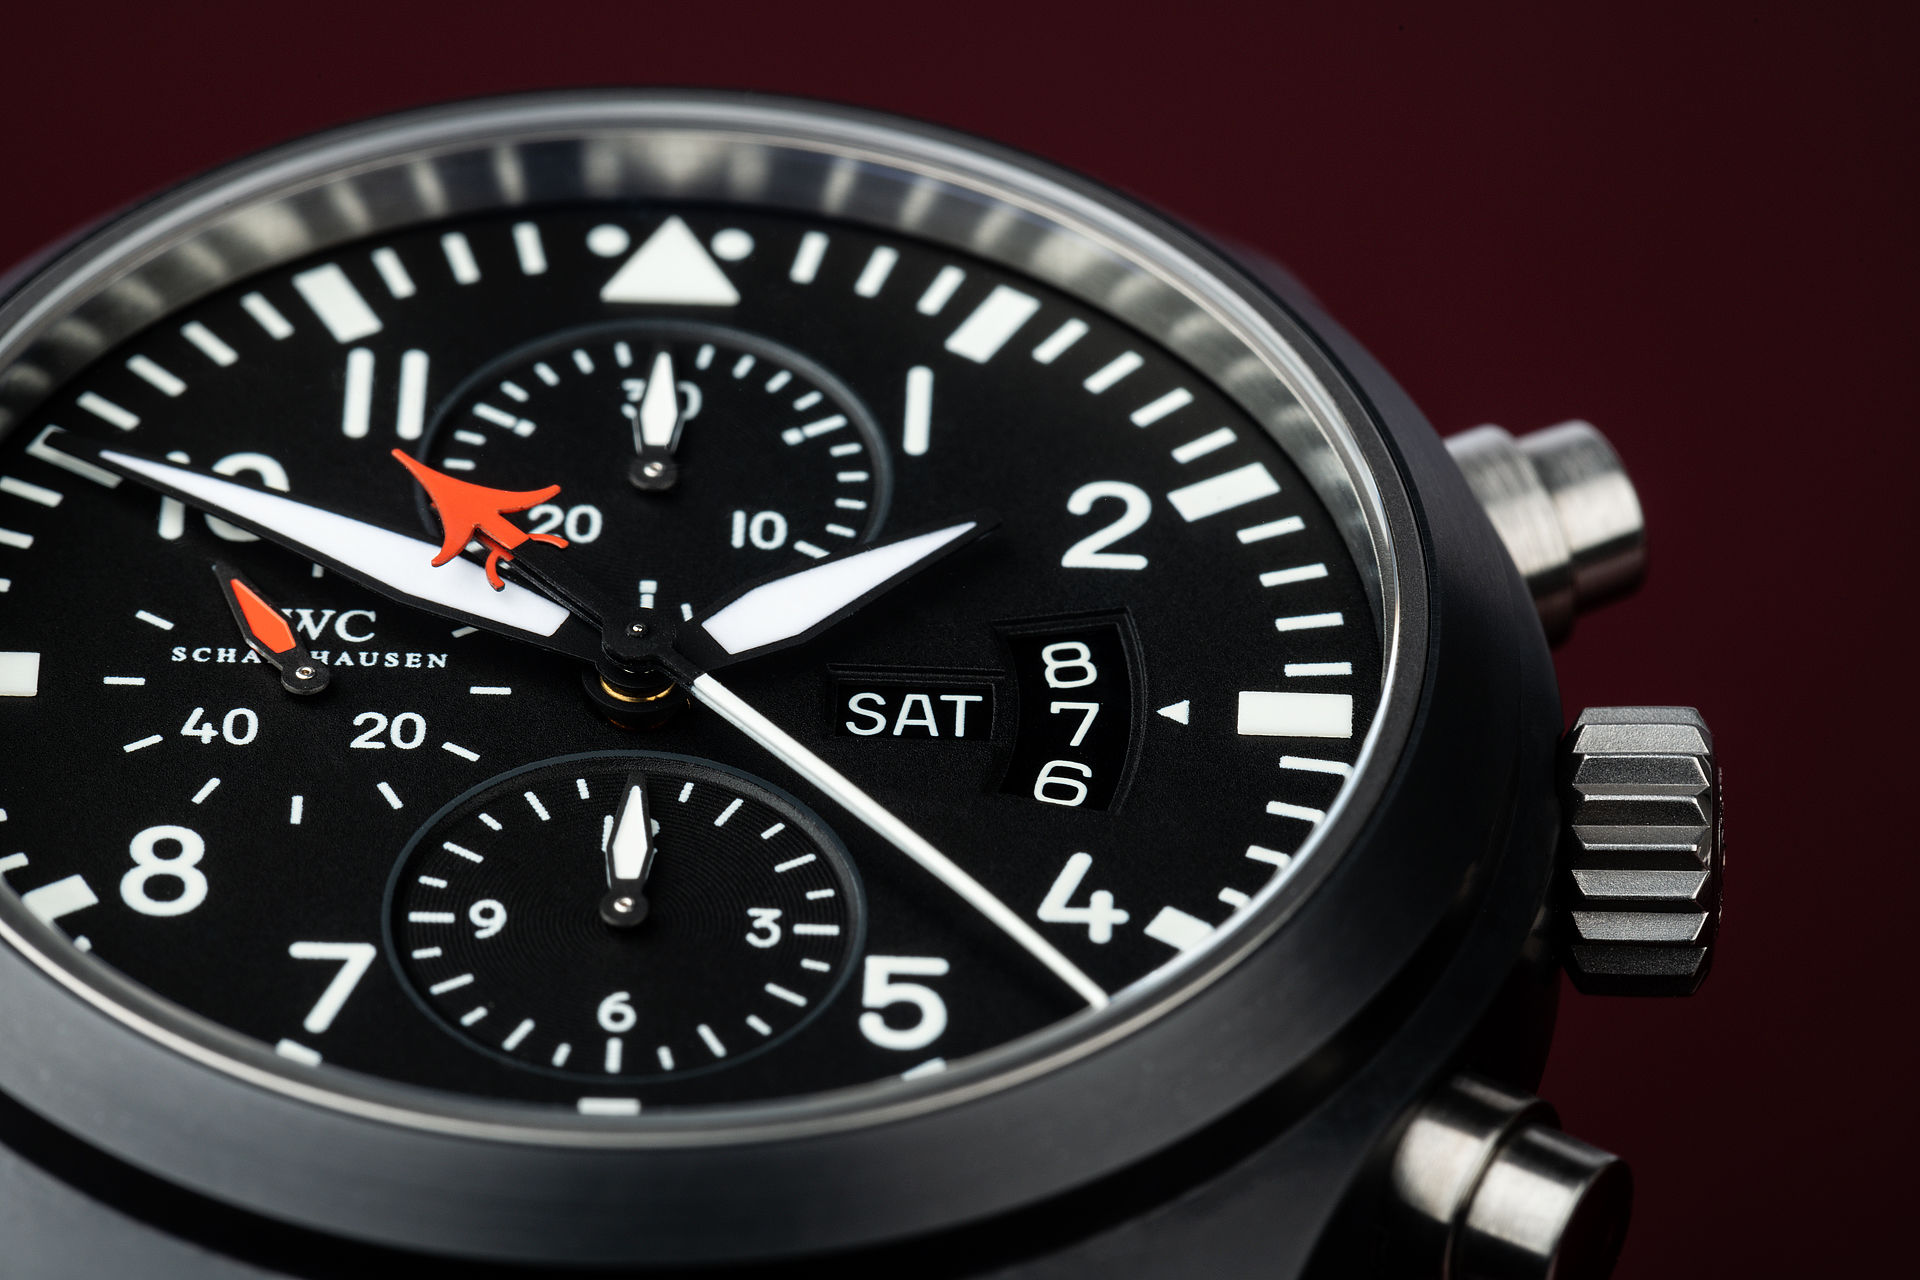 "Top Gun" Special Edition | ref IW379901 | IWC Pilot's Chronograph